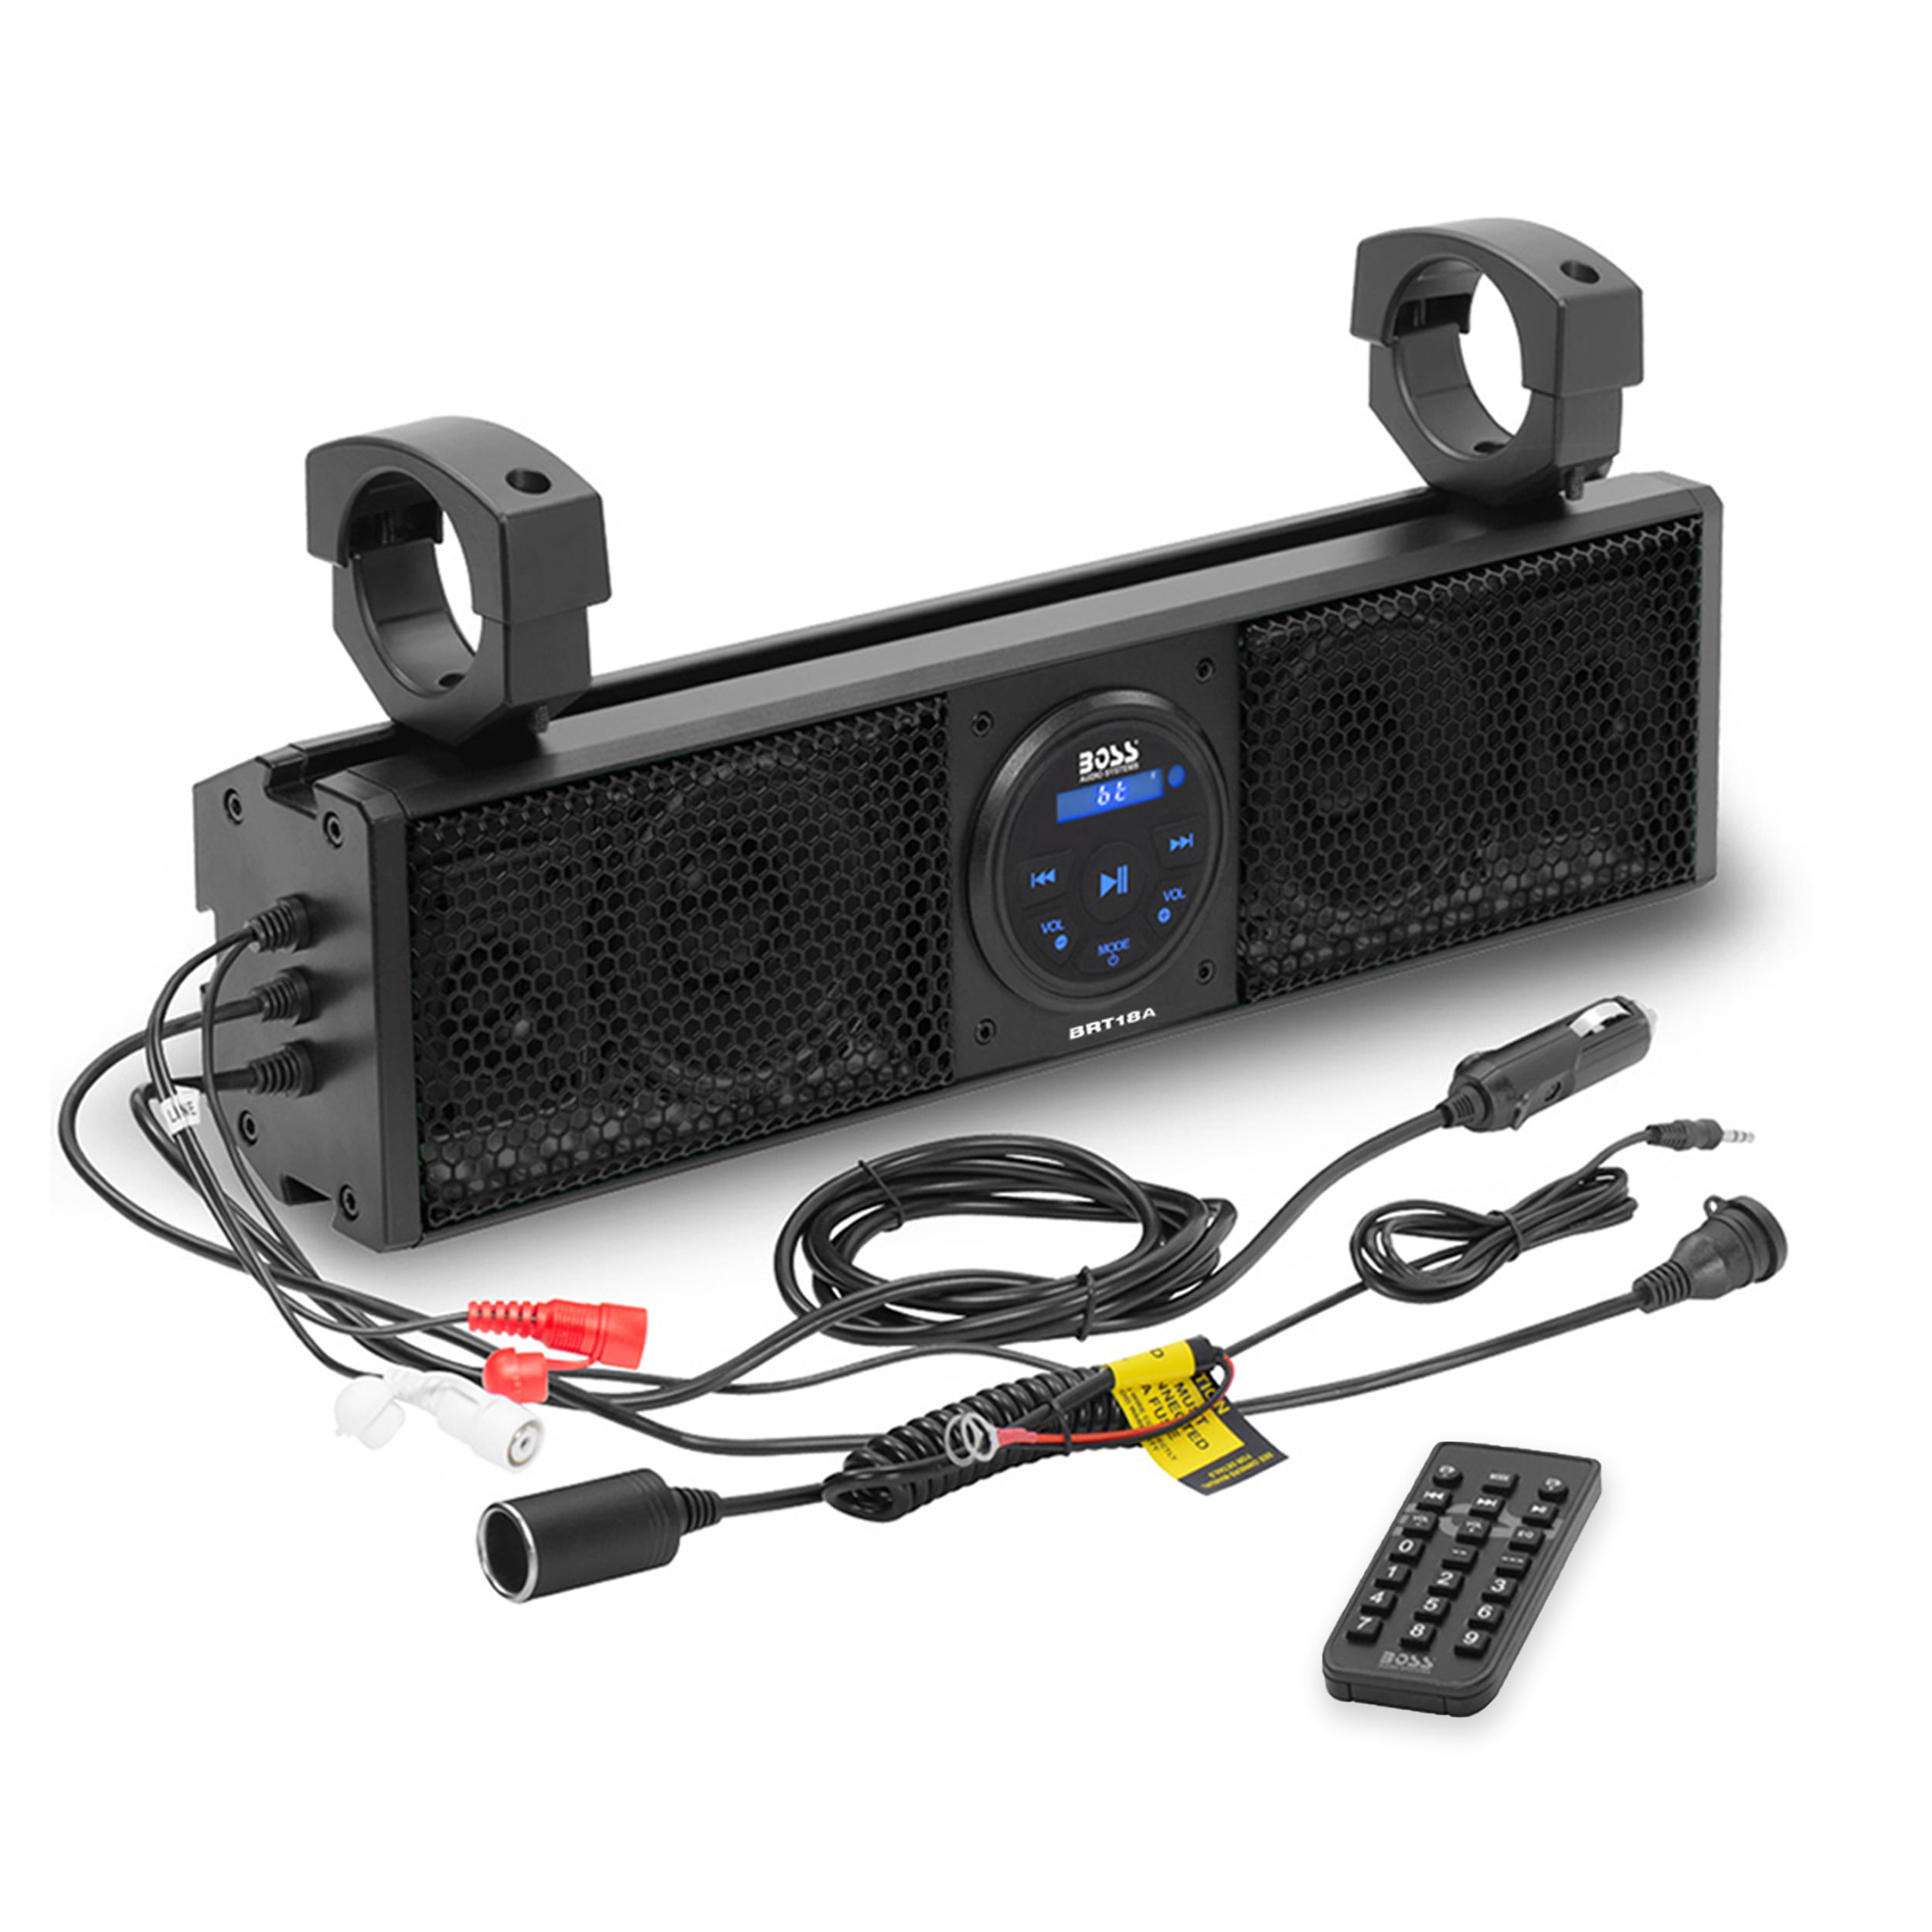 BOSS Audio Systems MC420B 600 Watt Motorcycle/ATV Sound System with Bluetooth Audio Streaming Built-in Amp Black